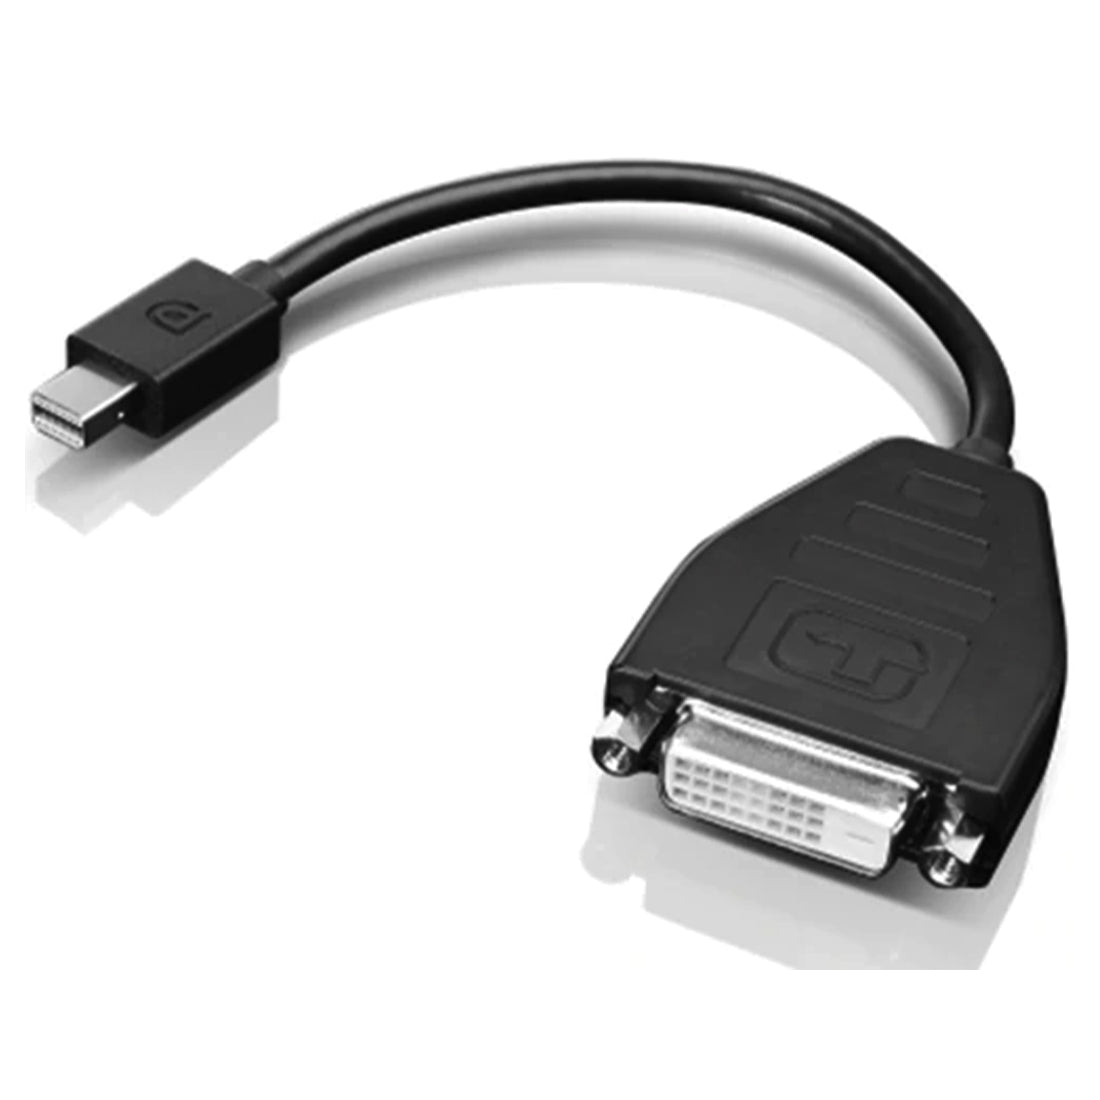 Lenovo Mini-DisplayPort to Single Link DVI Adapter with Resolution Up to1920 x 1200 at 60 Hz